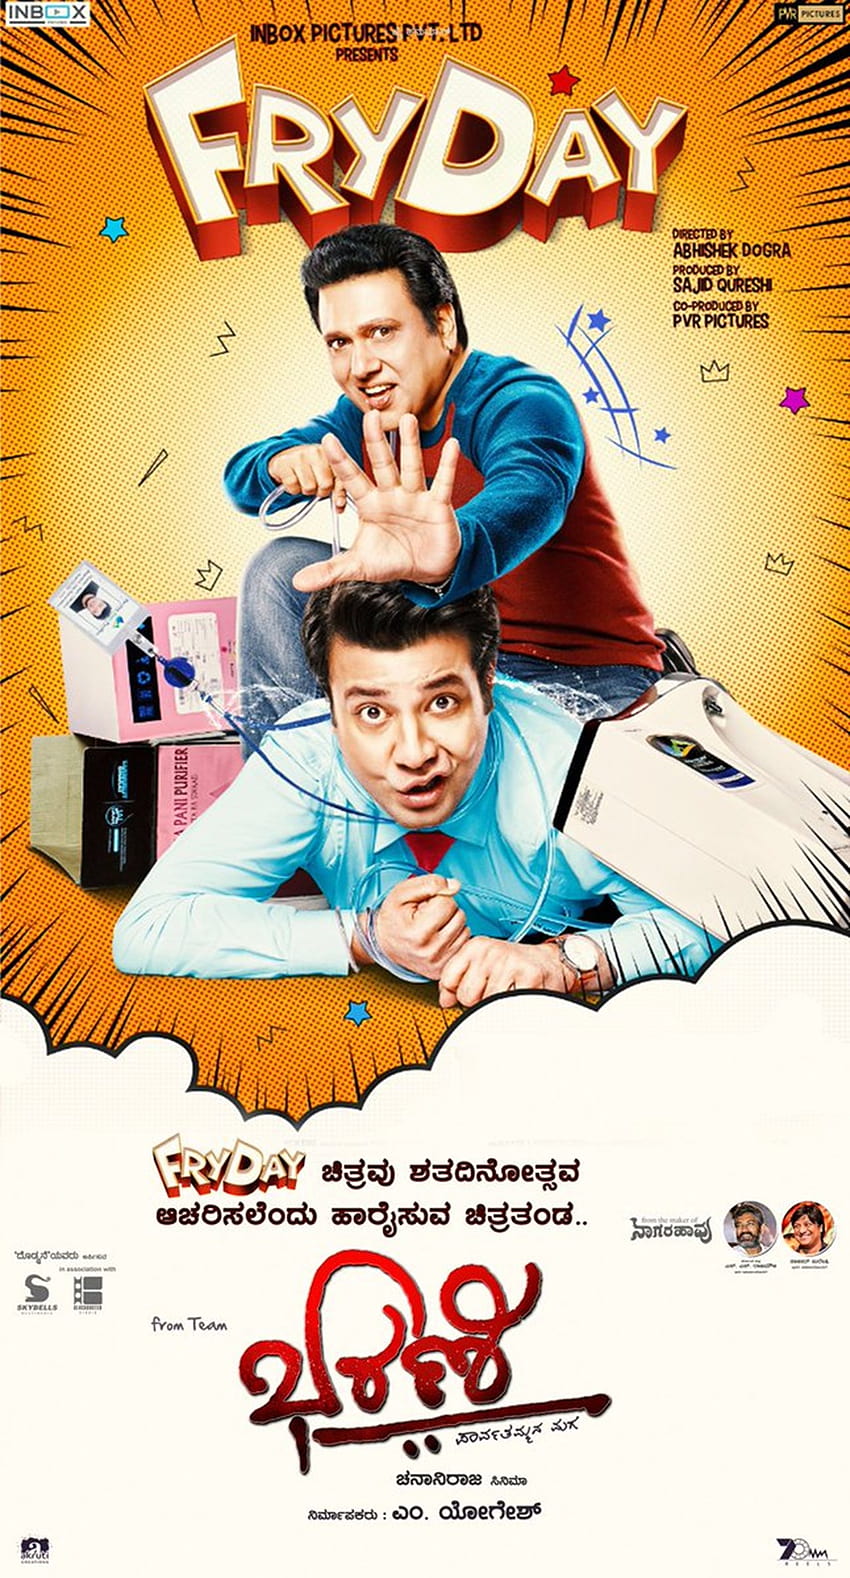 Govinda sparks again in 'Fry Day' release HD phone wallpaper